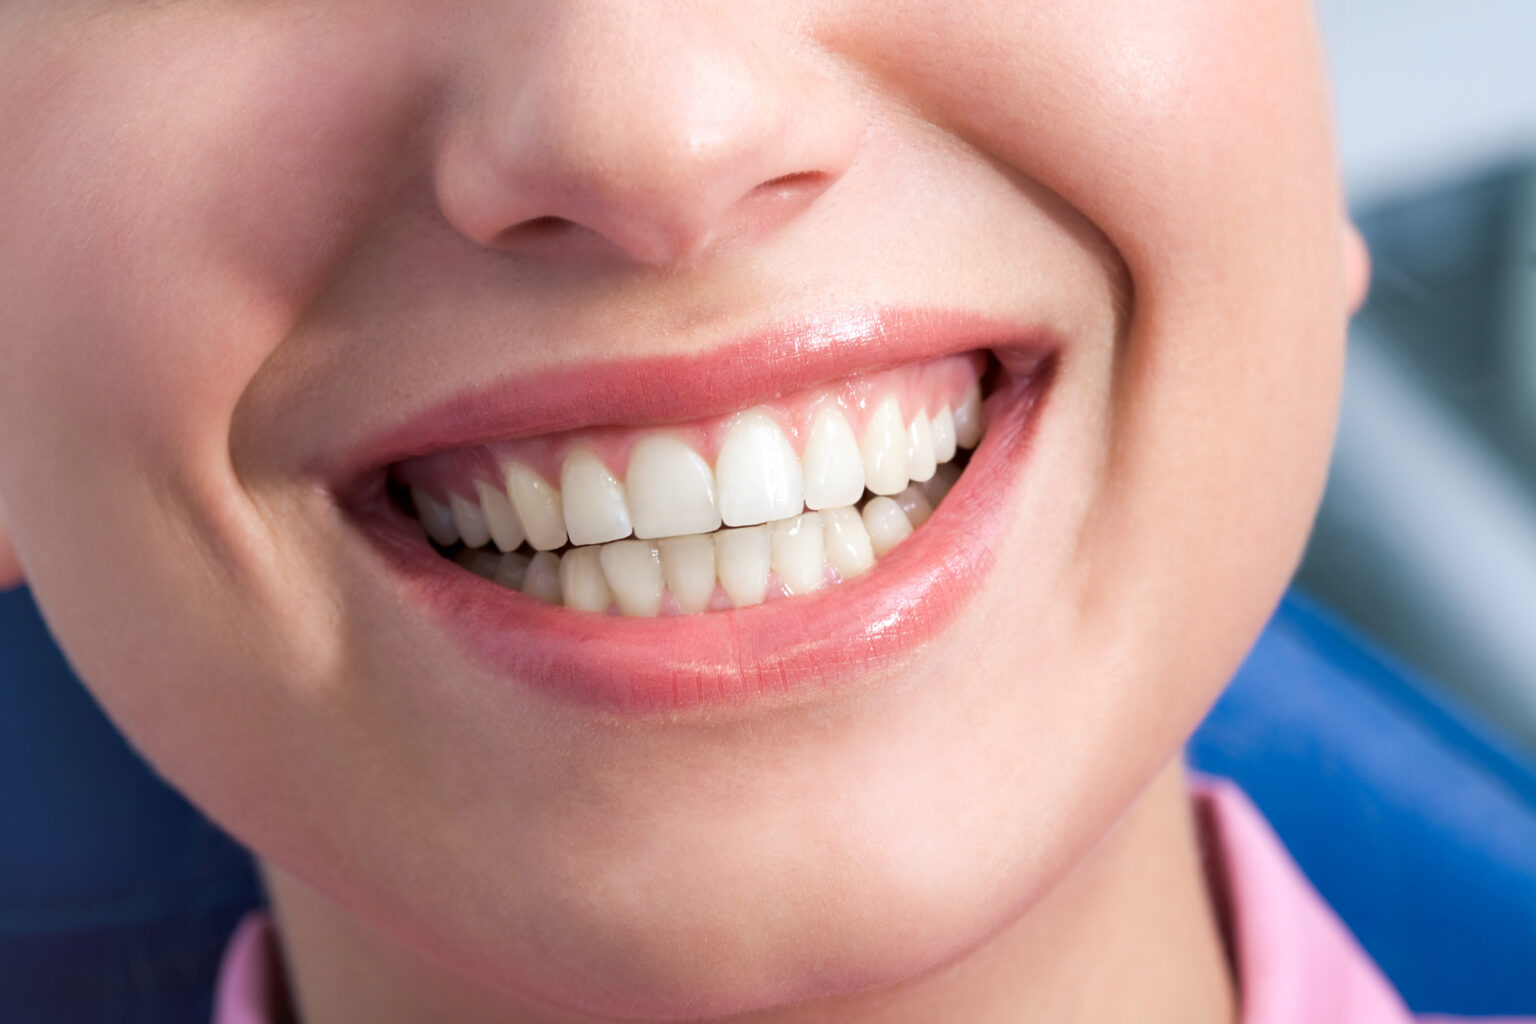 Close-up of a smiling person showing healthy teeth thanks to an affordable Dallas dentist.